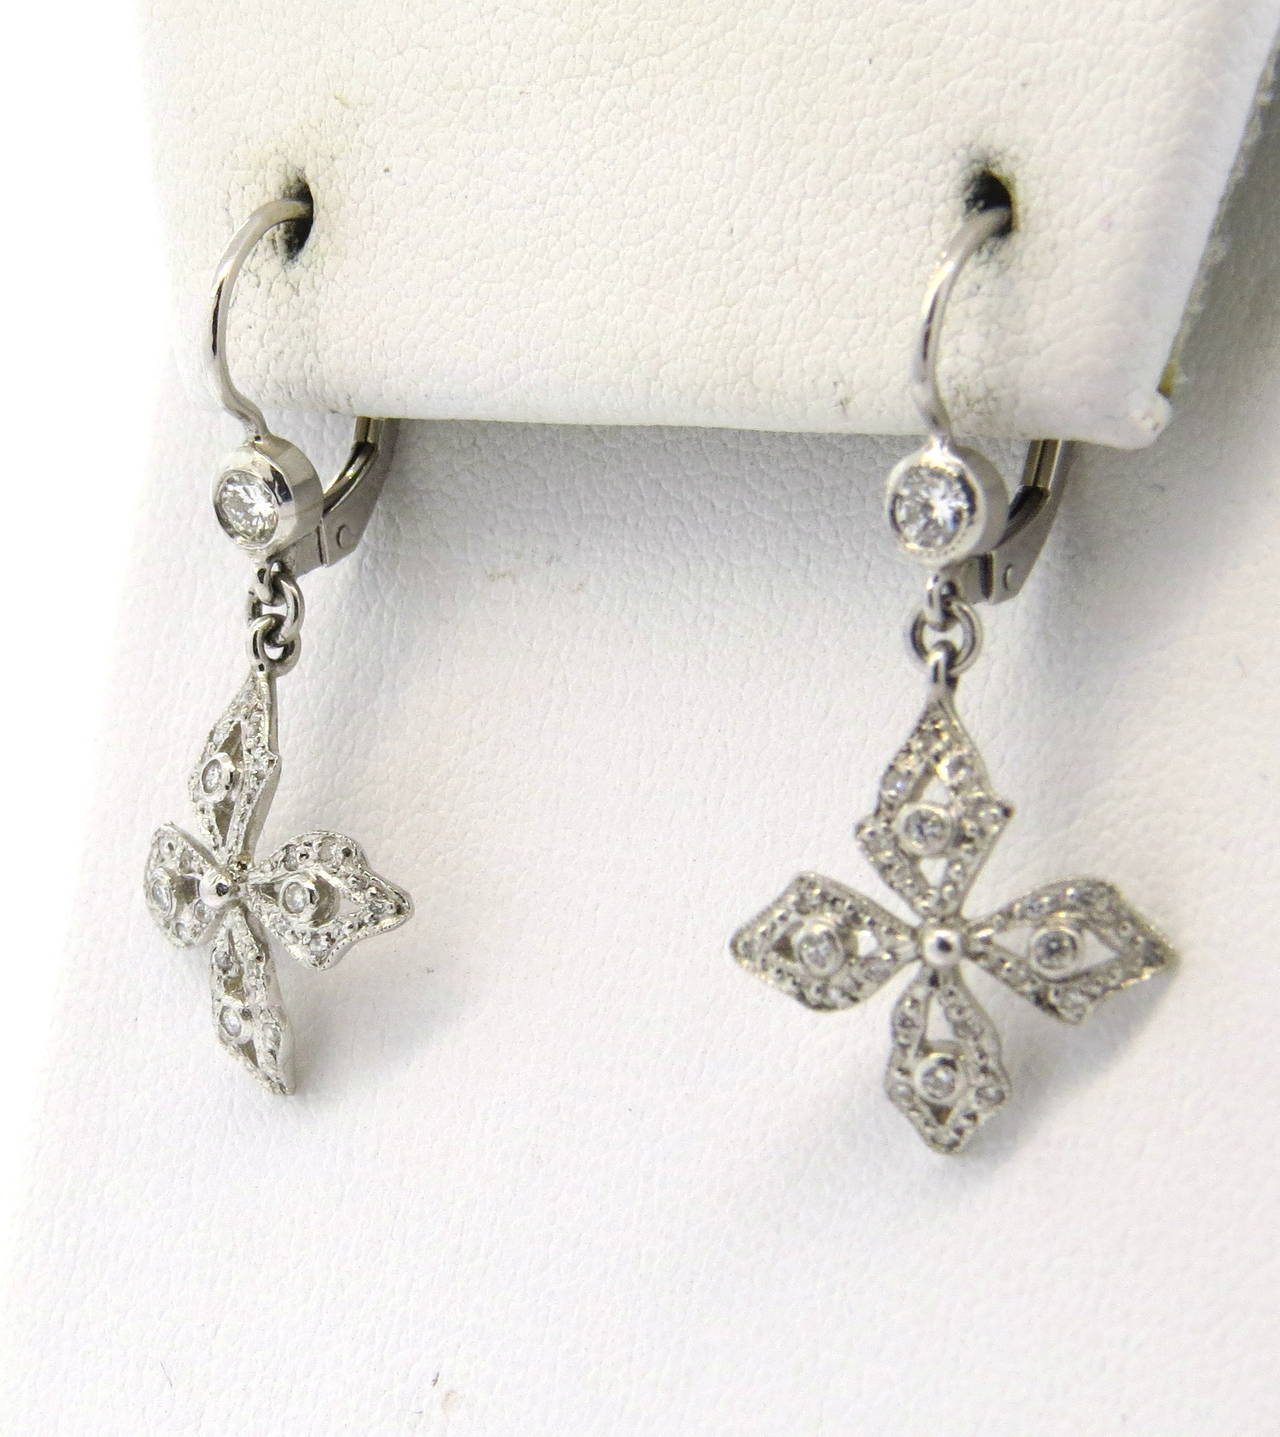 A pair of platinum earrings set with approximately 0.30ctw of G/VS diamonds.  Crafted by Cathy Waterman, the earrings measure 33mm x 10mm including the wire.  Marked CW, 900PT. Weight - 4.6 grams